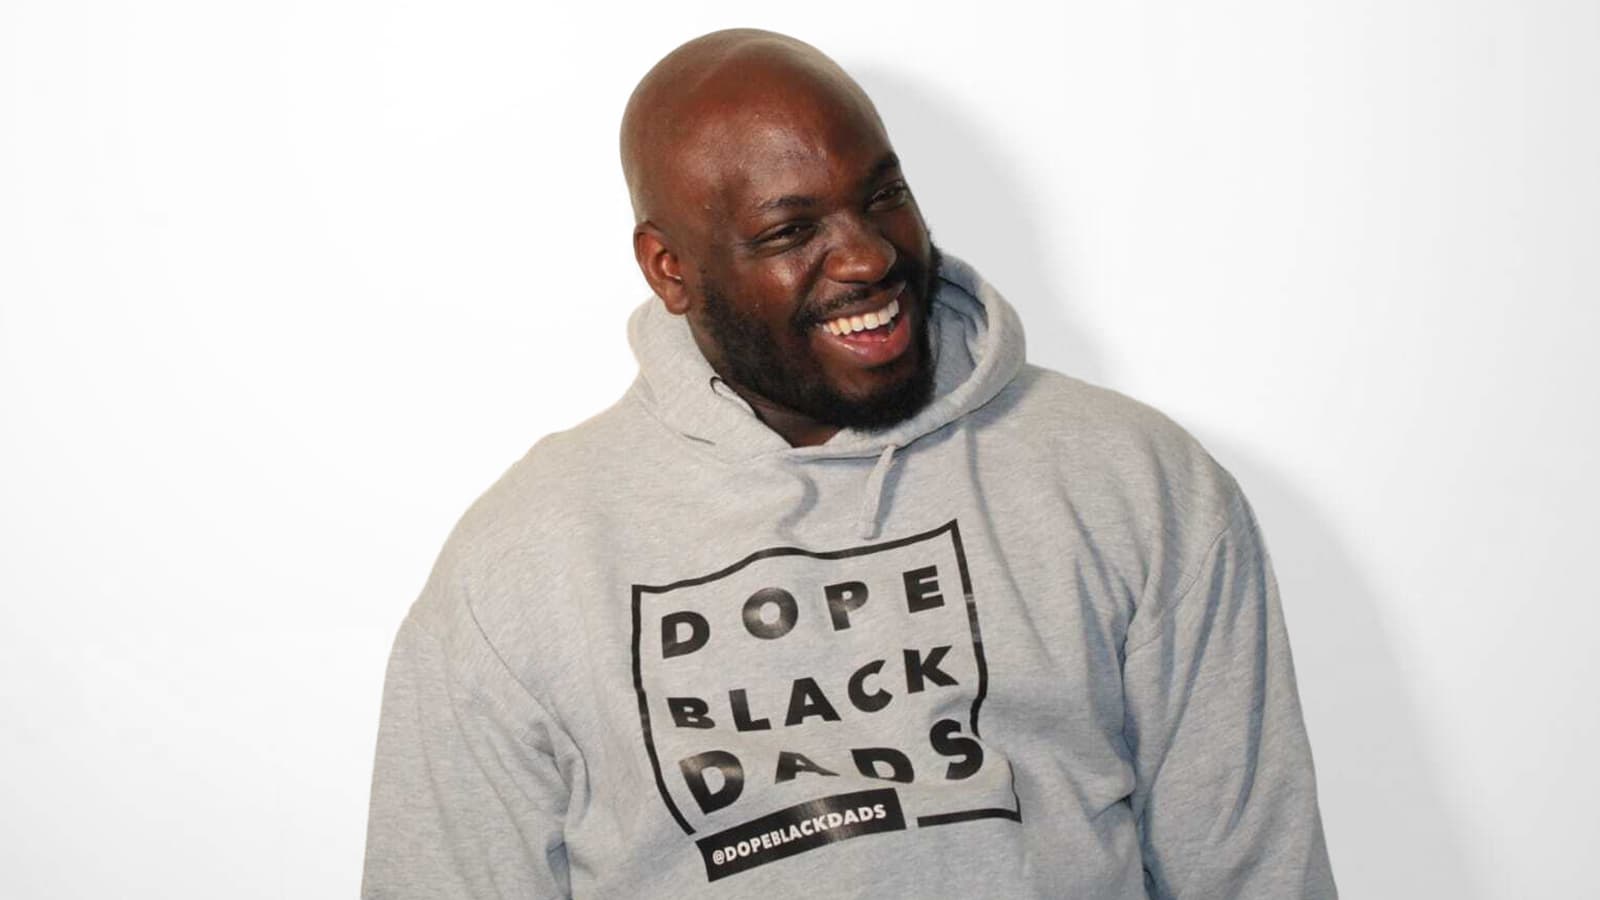 Marvyn Harrison, founder of the Dope Black Dads podcast